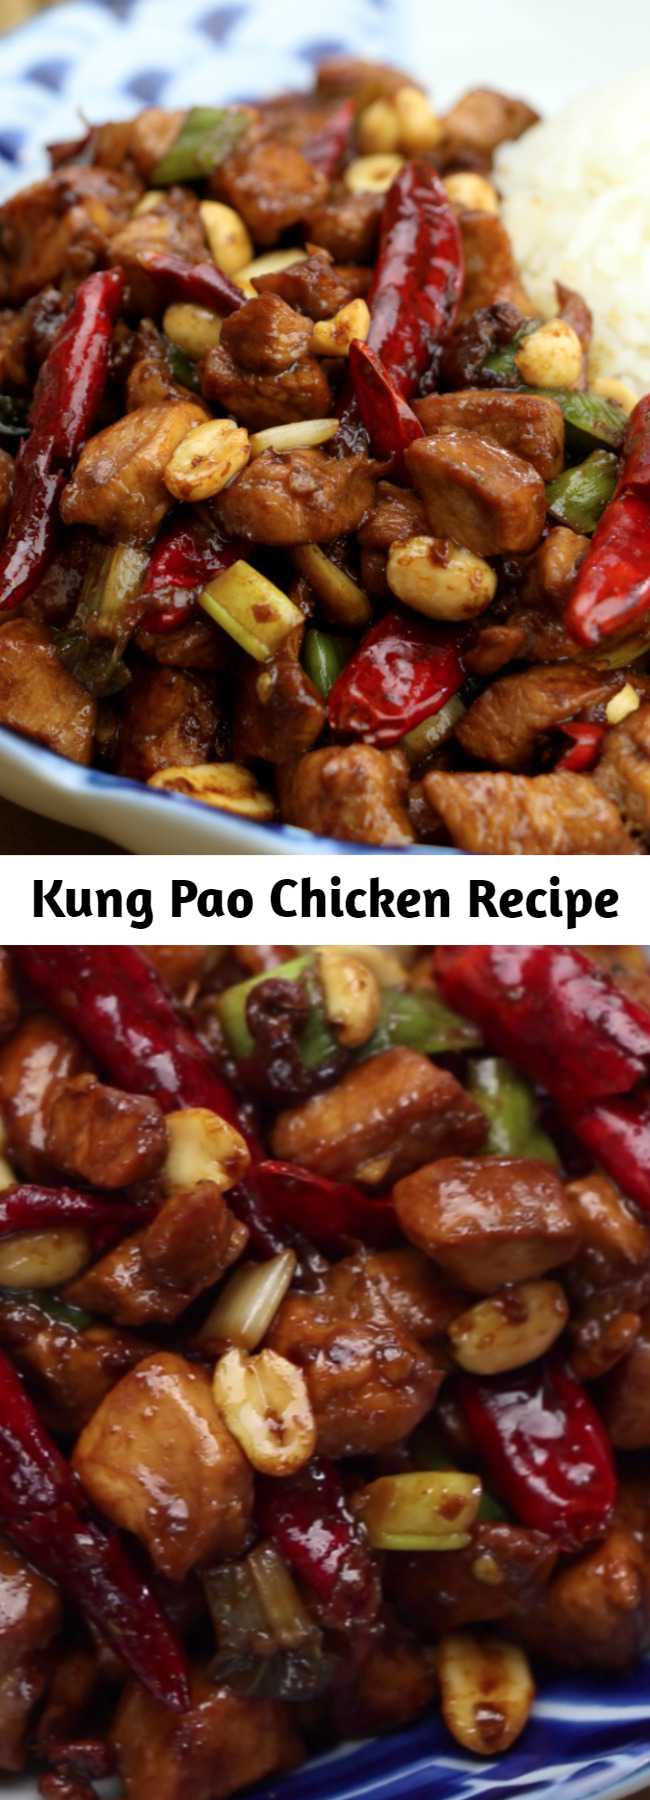 Kung Pao Chicken Recipe - Spicy, sweet and incredibly delicious chicken with peanuts!